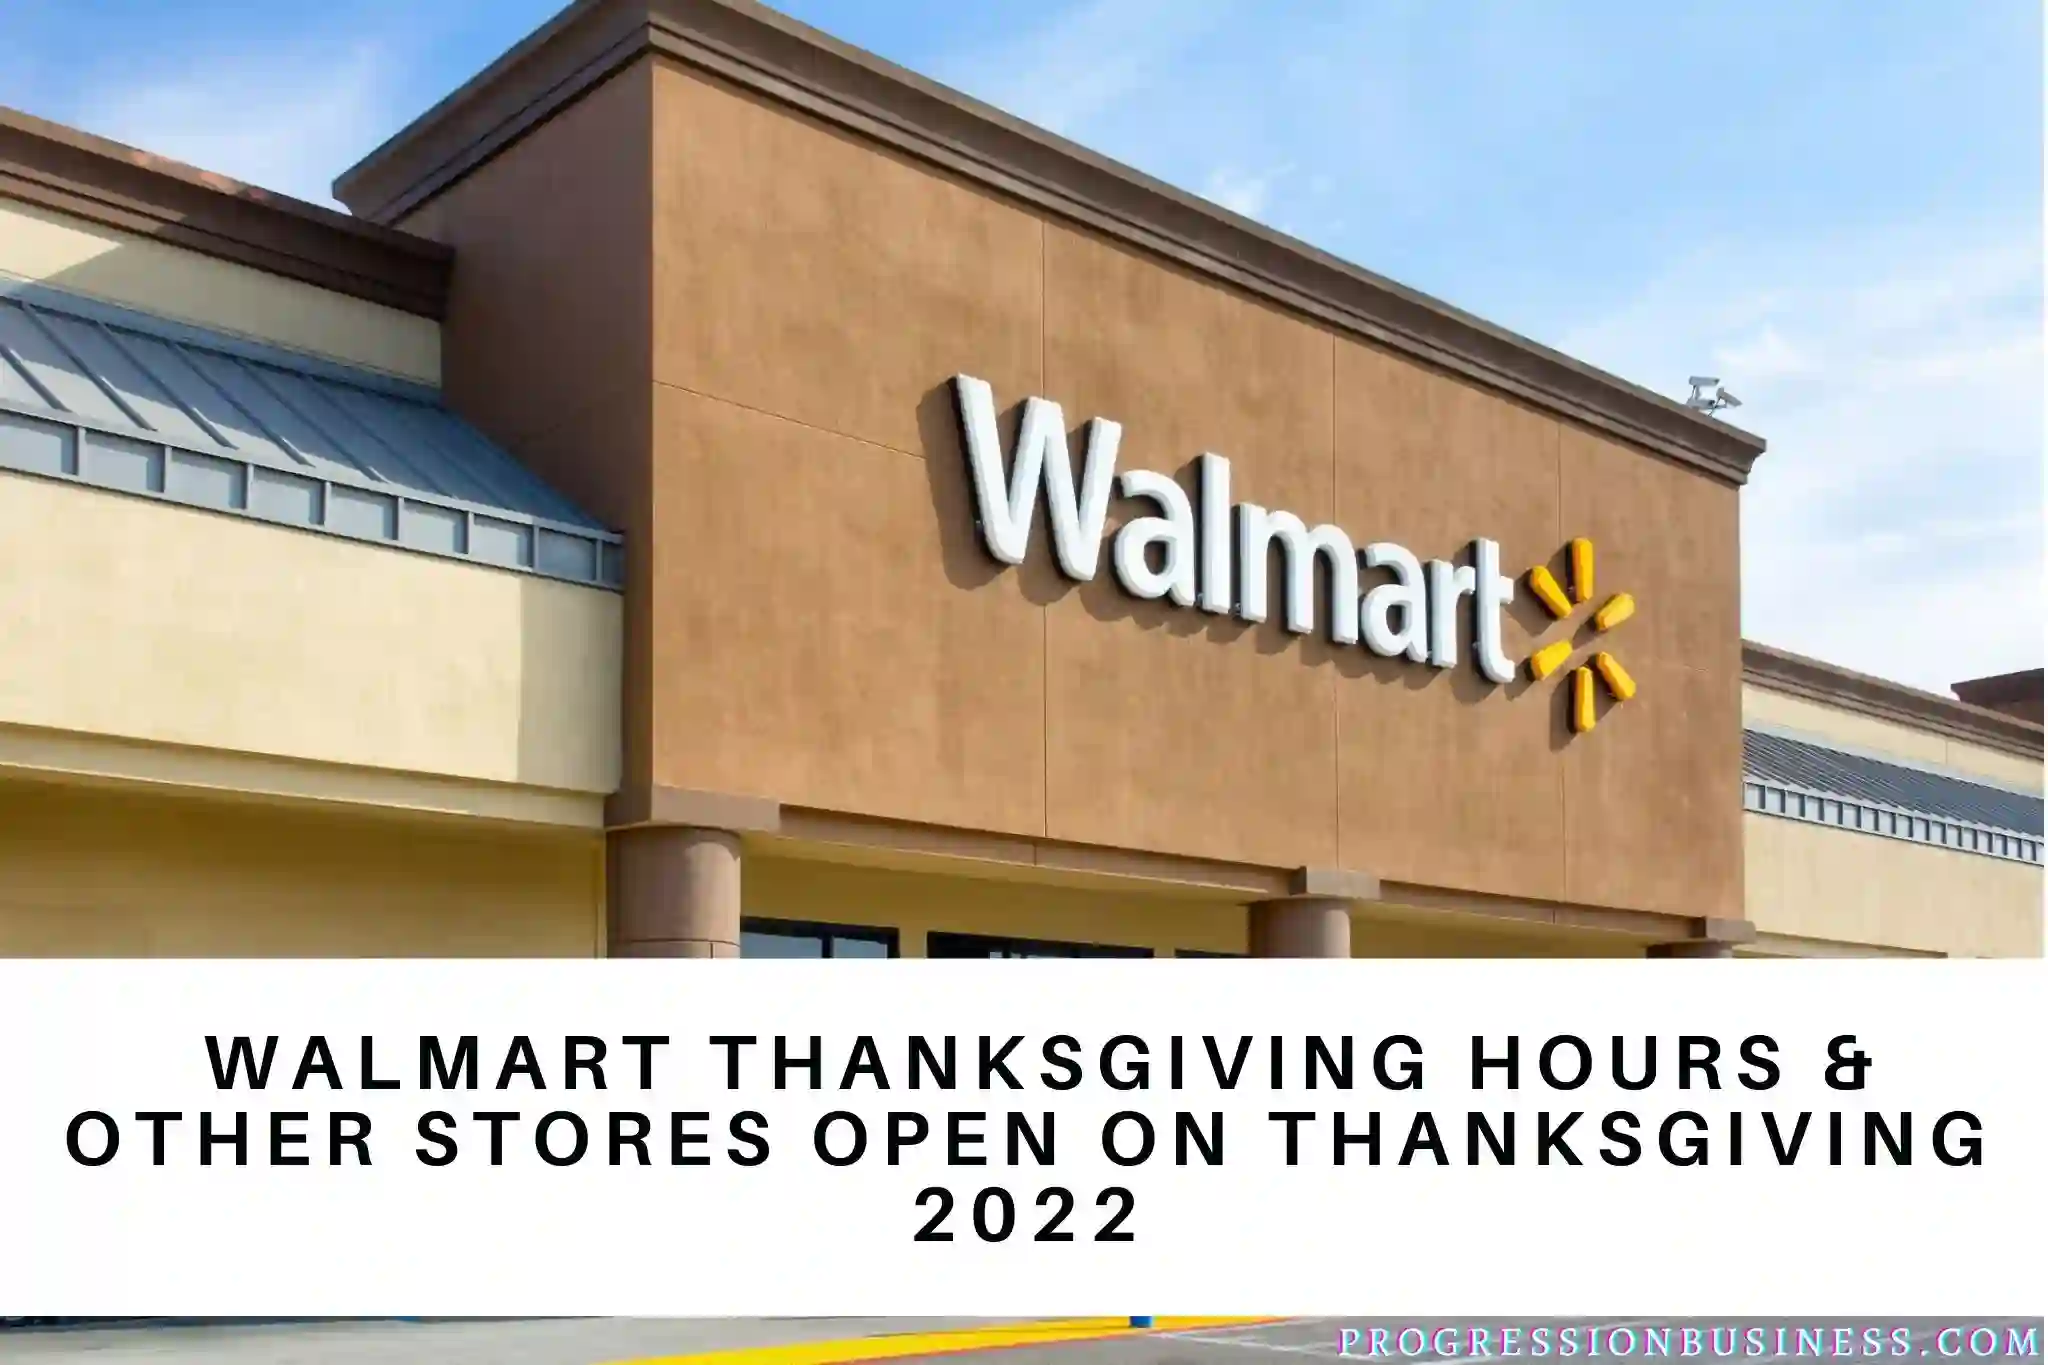 Walmart Thanksgiving Hours & Other Stores Open On Thanksgiving 2022